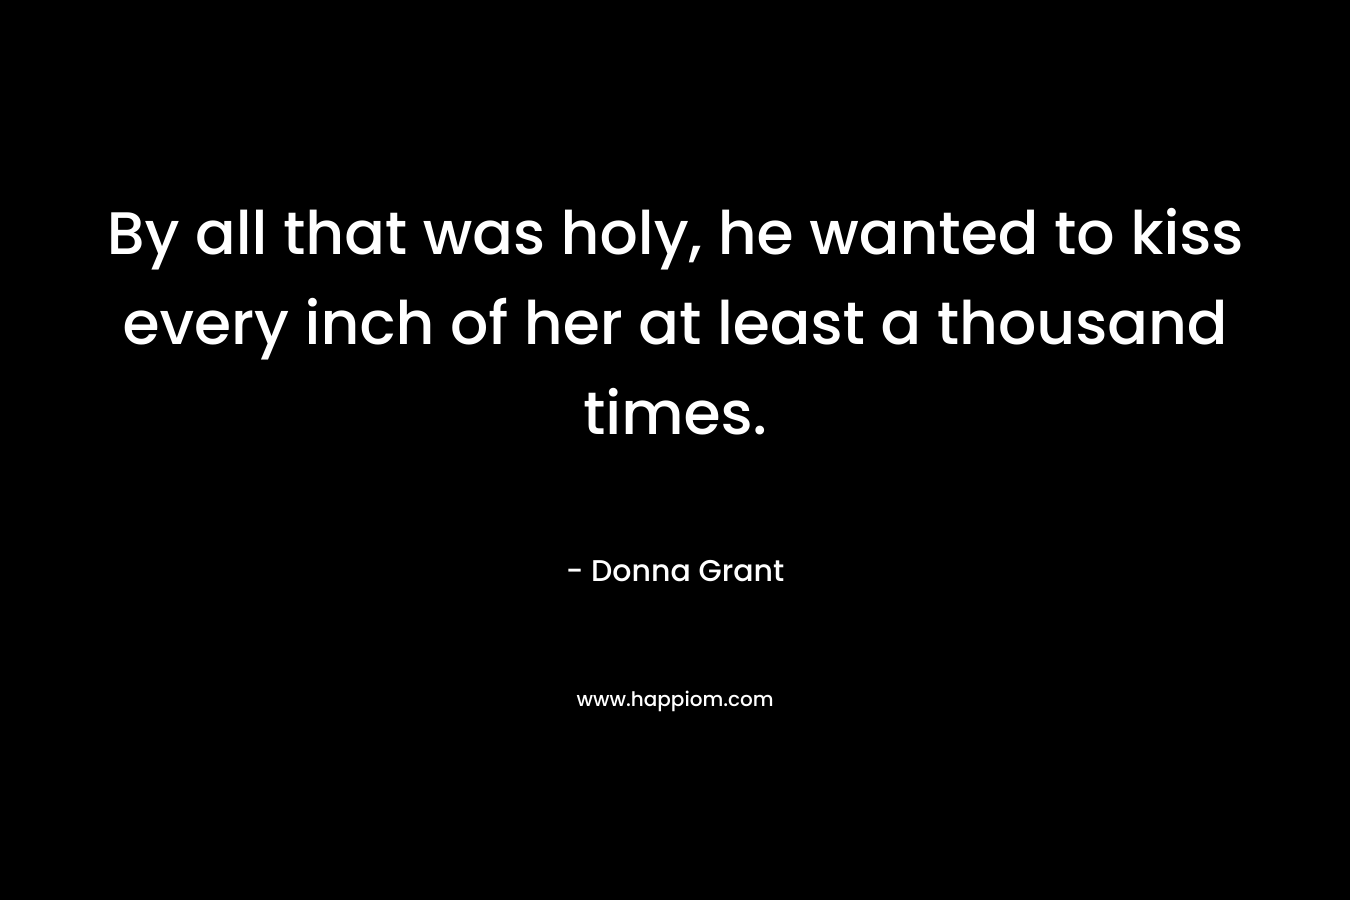 By all that was holy, he wanted to kiss every inch of her at least a thousand times. – Donna Grant